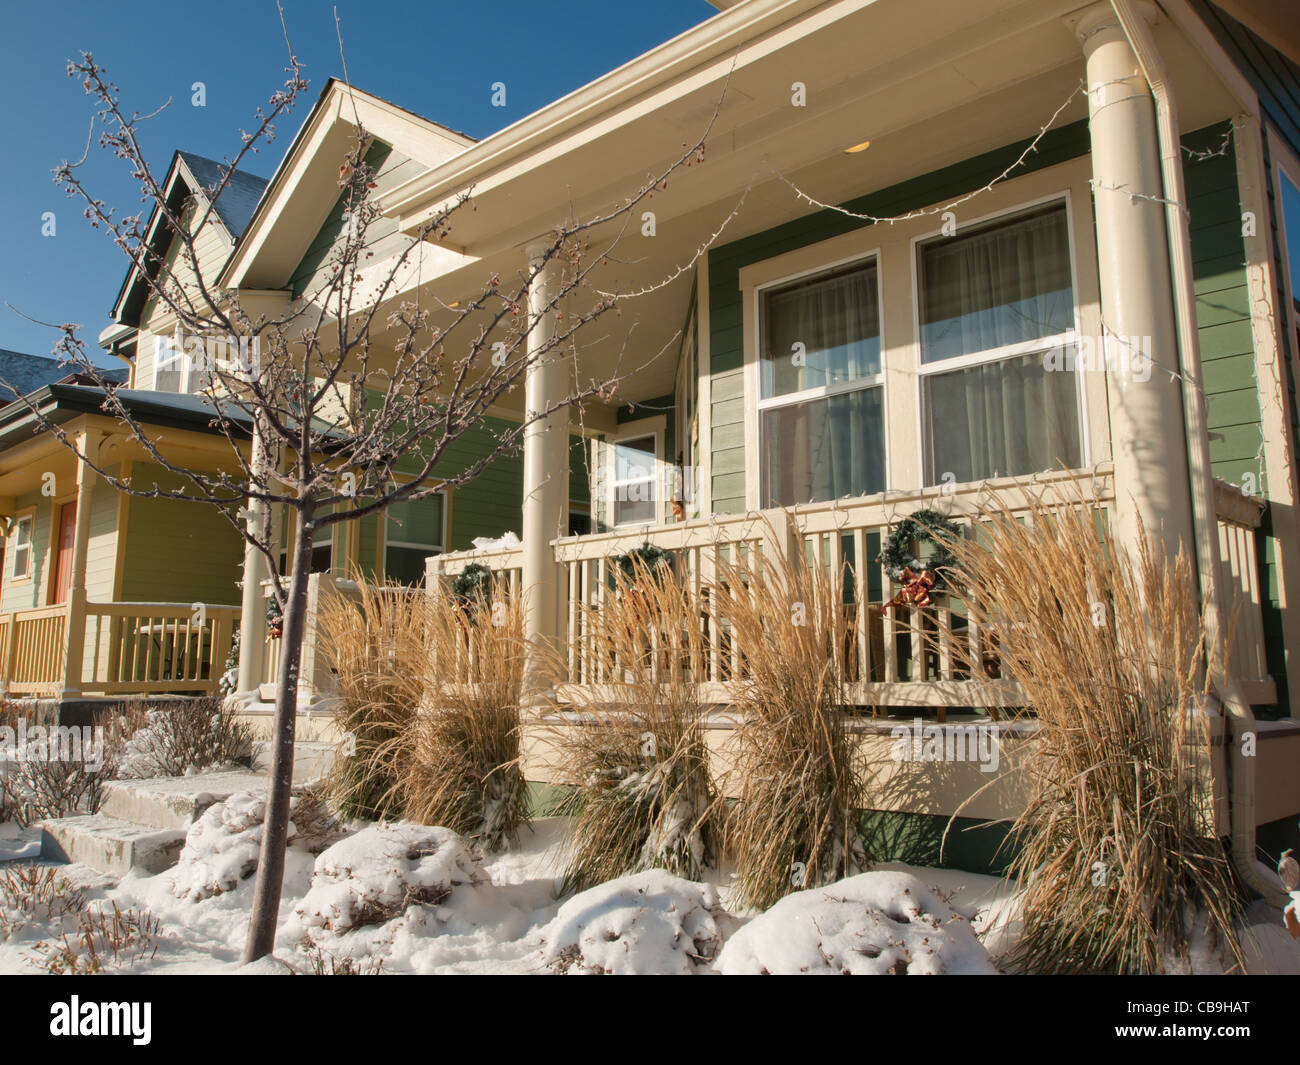 House decorated for winter holidays. Stock Photo